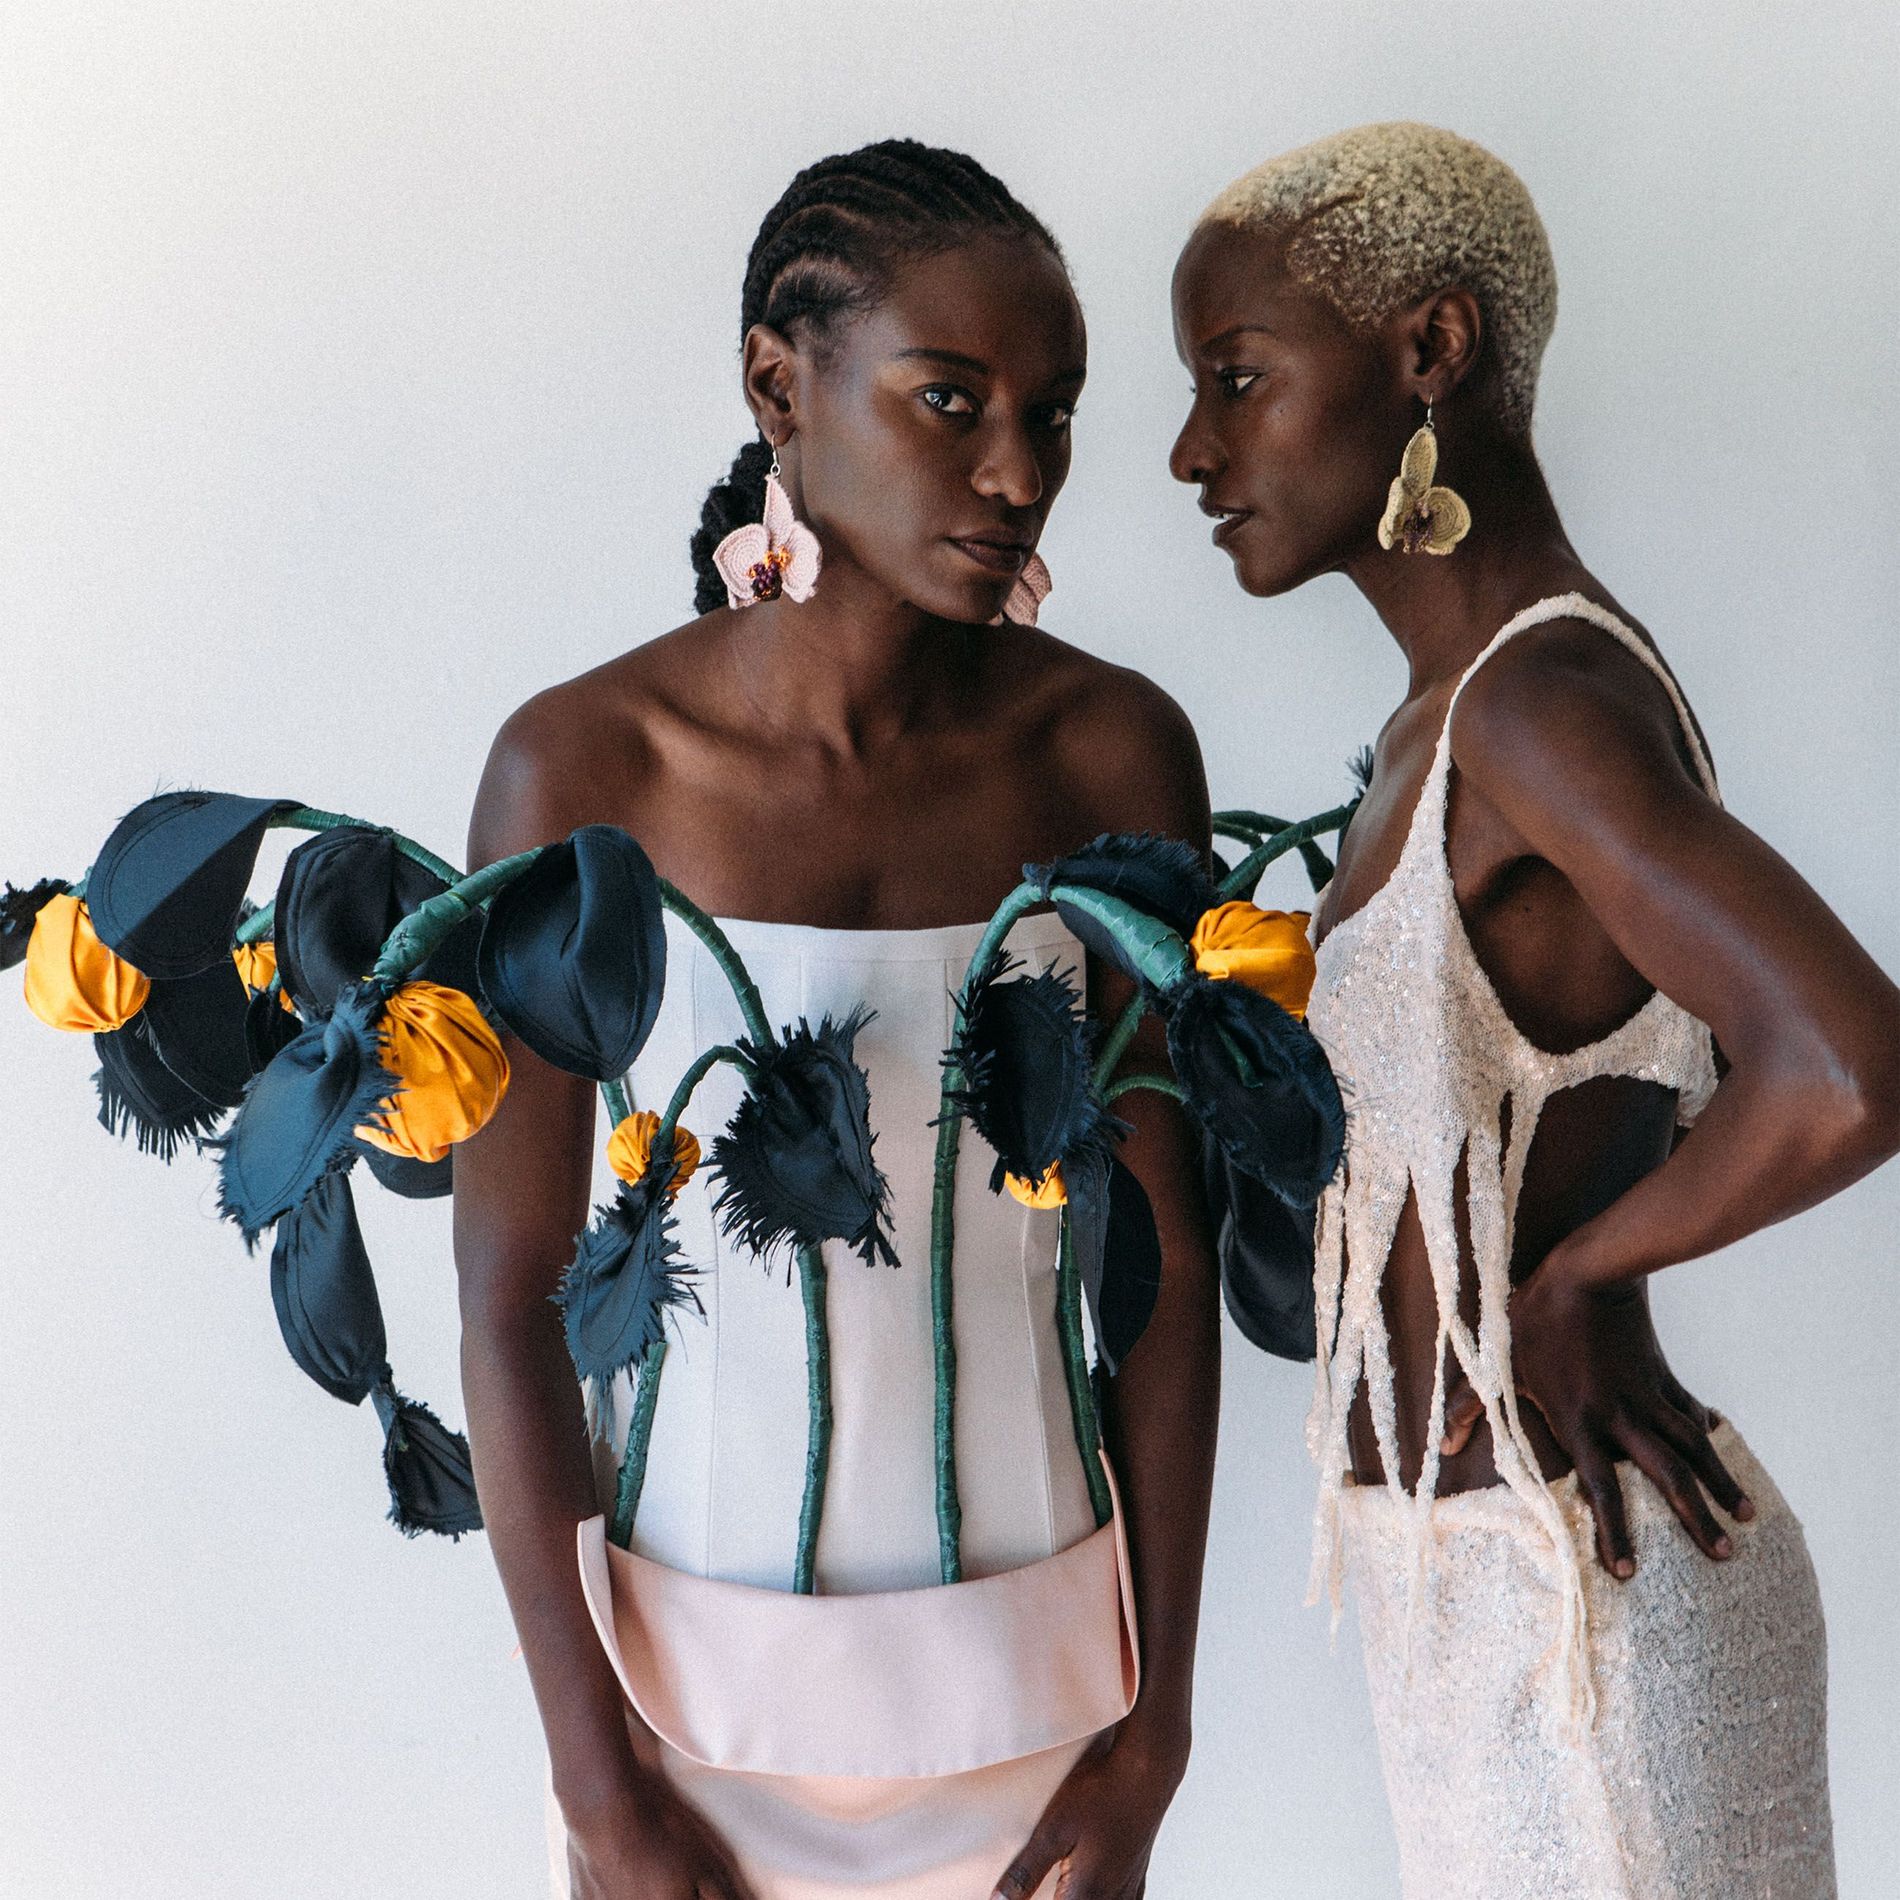 “Fashion is the thing that we do together”: Models Noella and Nickosha ...